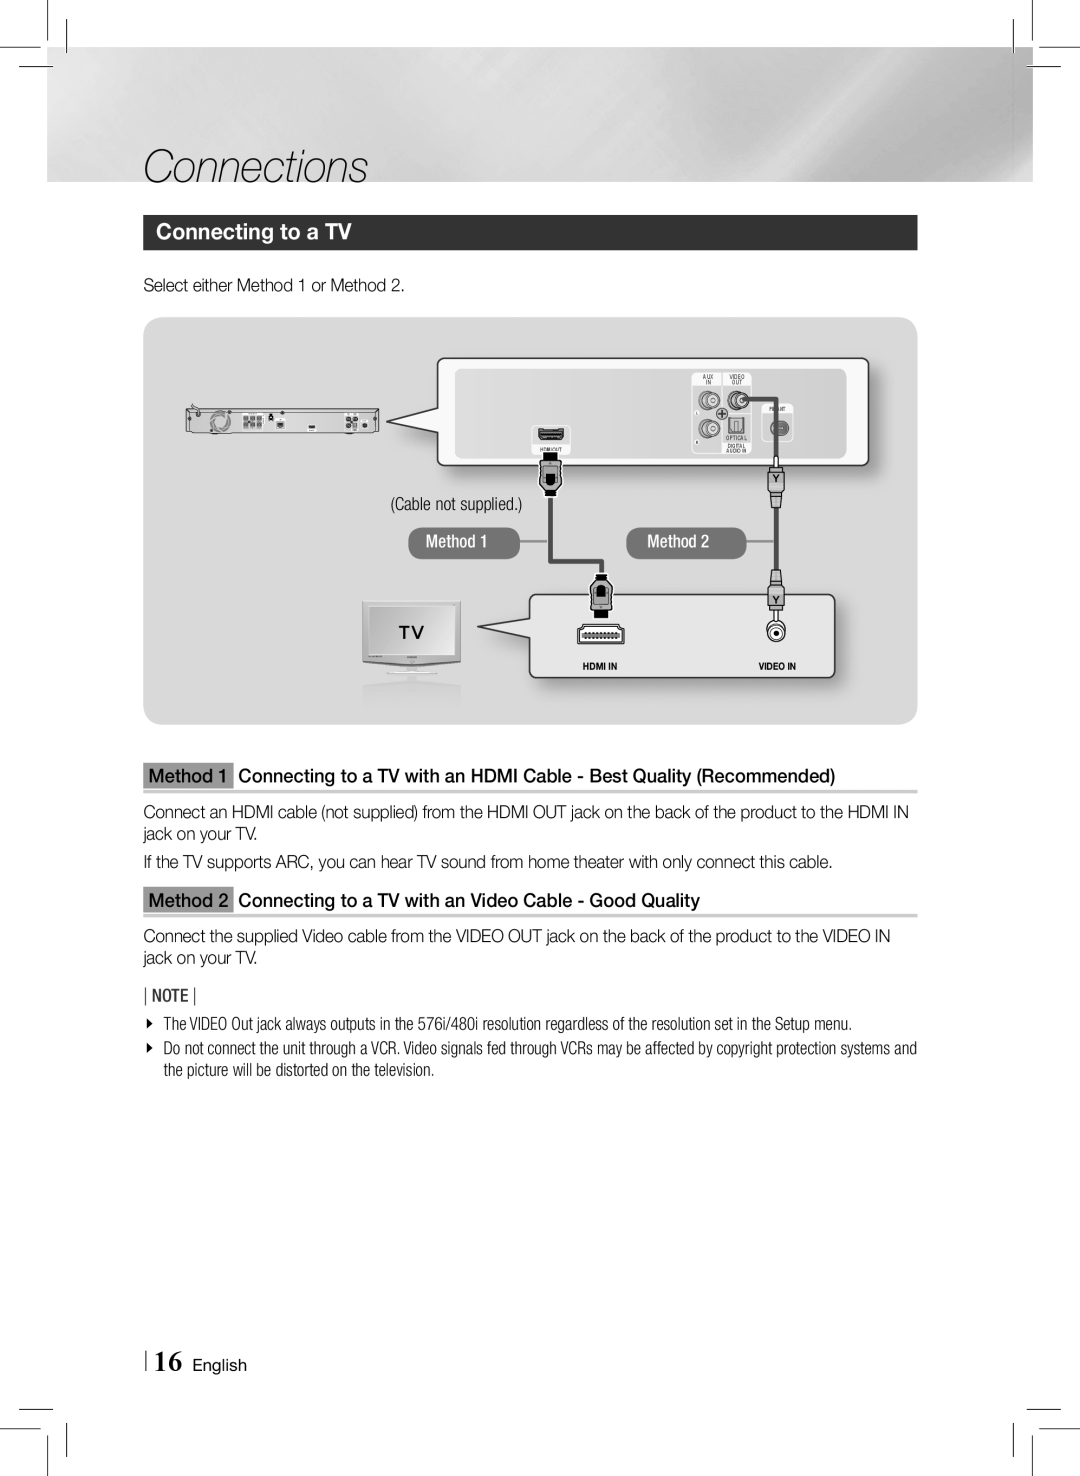 Samsung HTE3500ZA user manual Connecting to a TV, Connections 